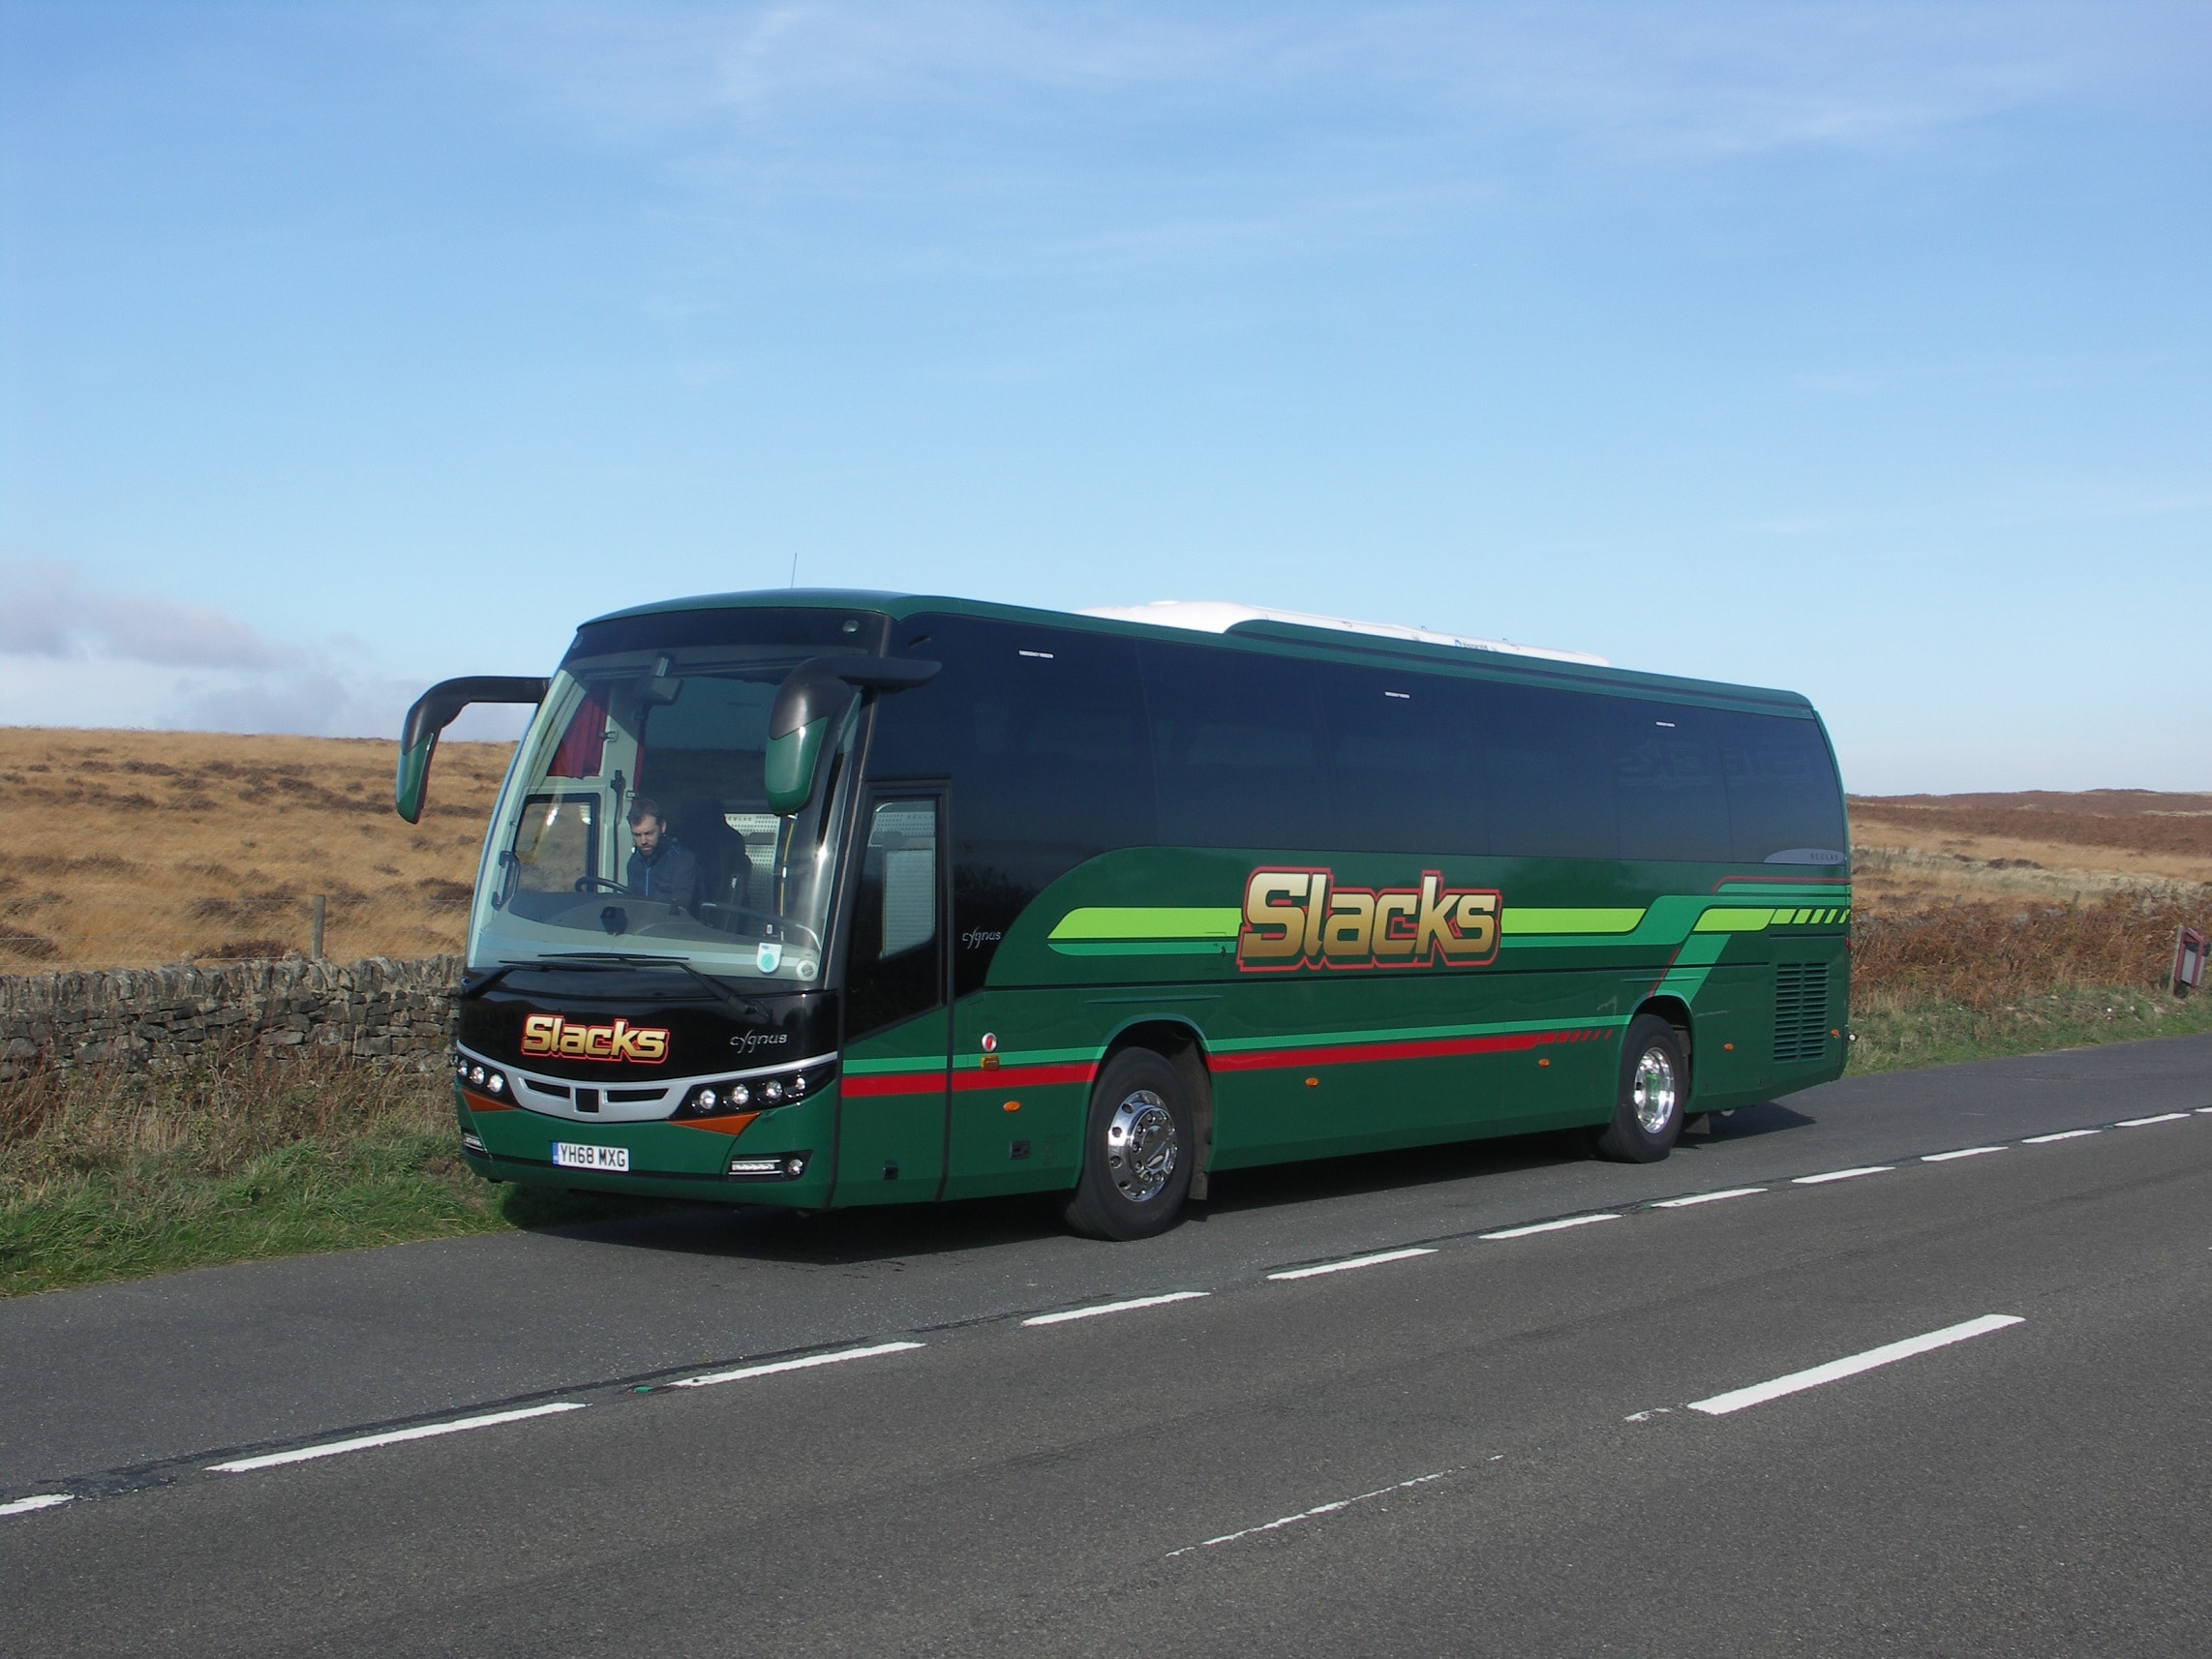 School coach hire rates rising rapidly